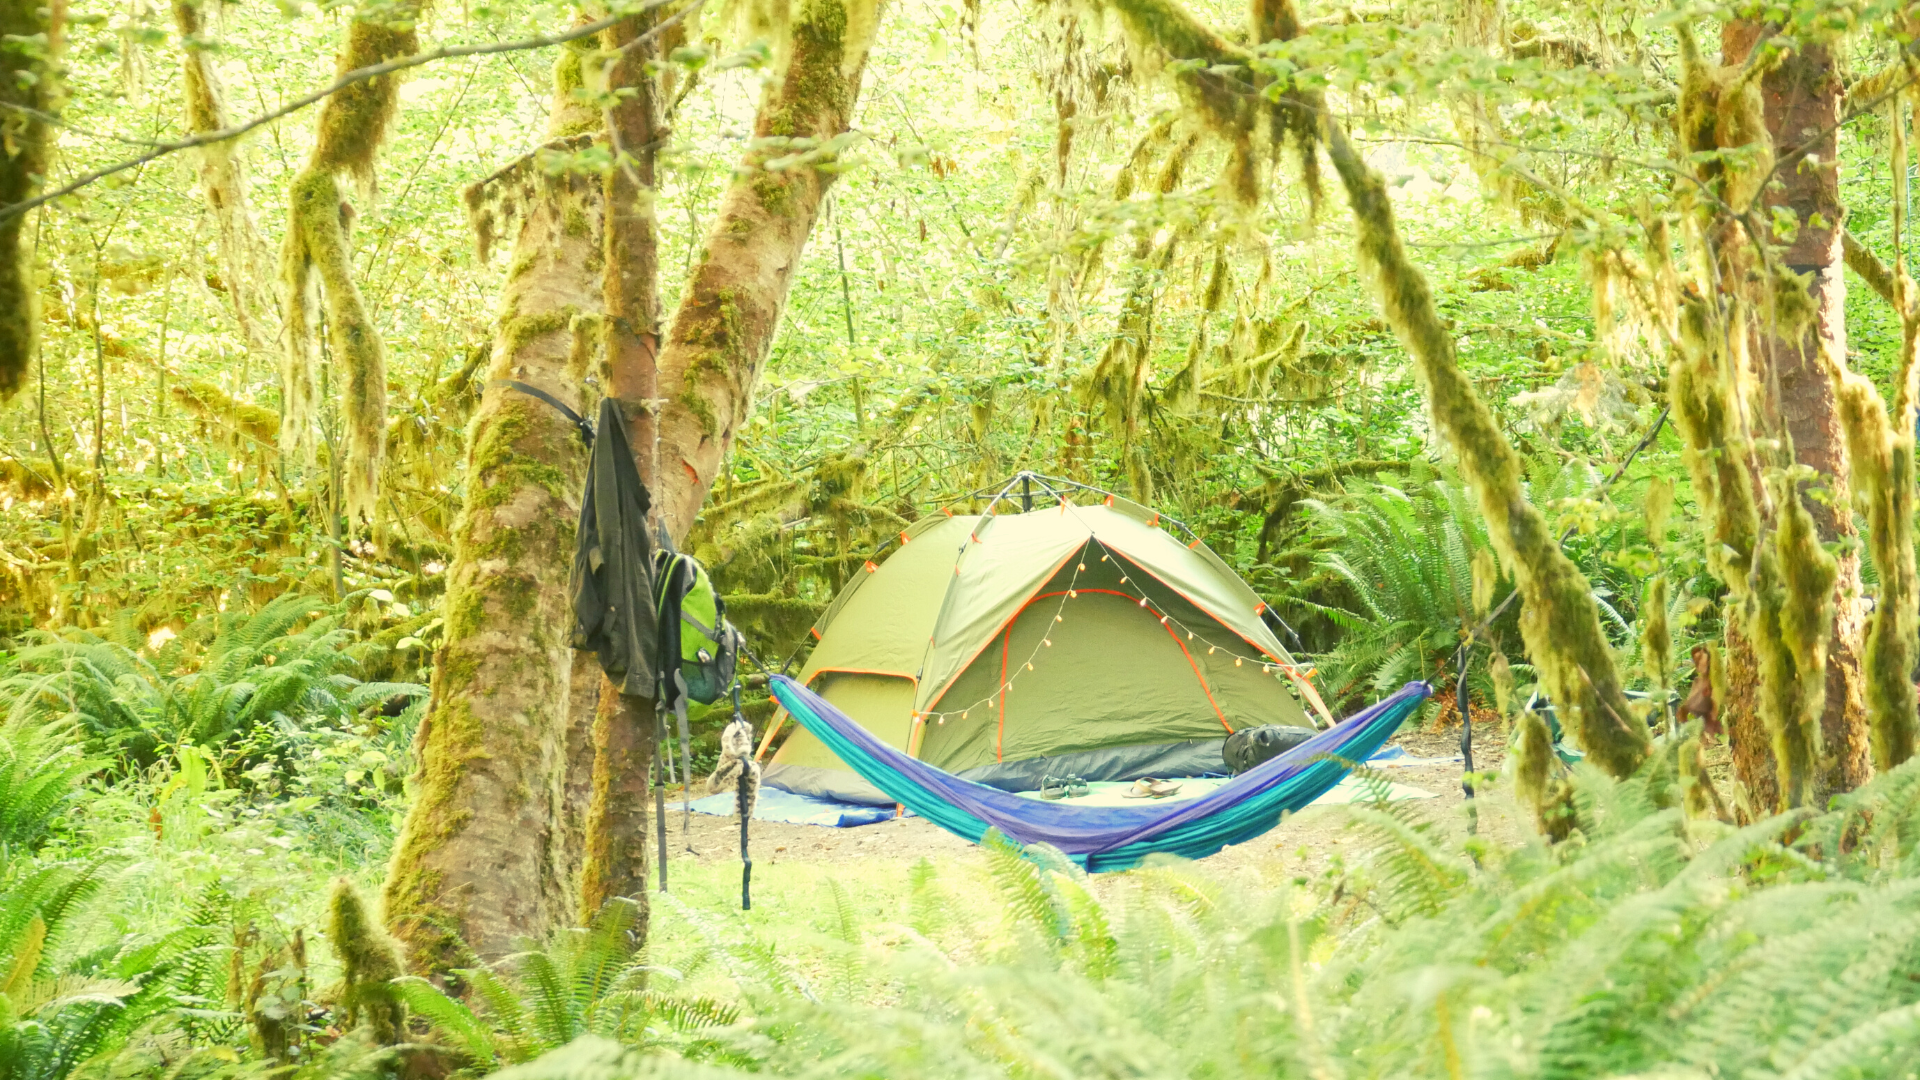 Camping in Washington's How Rainforest